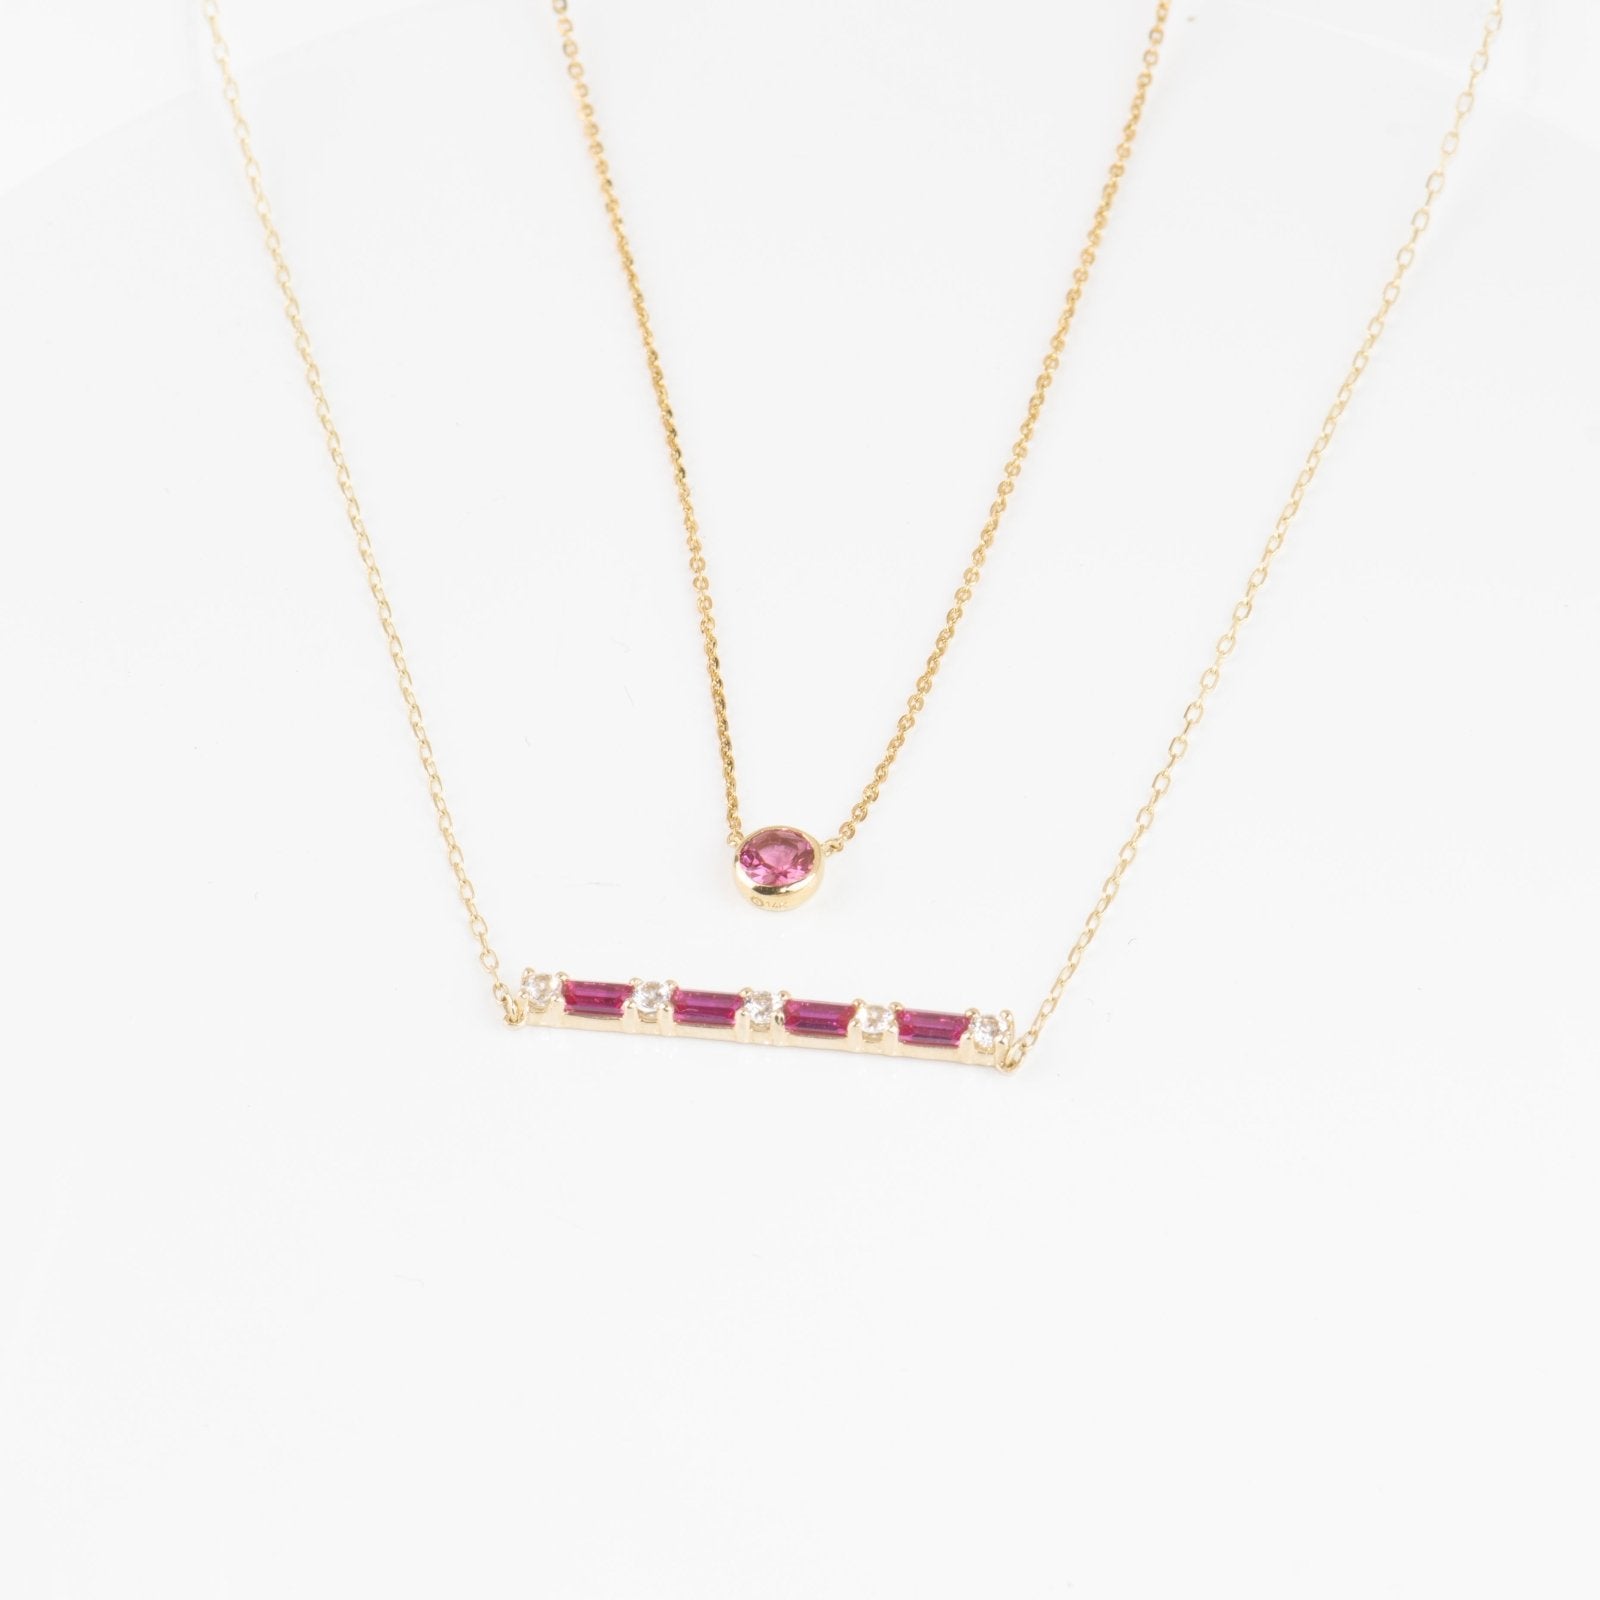 Alternating Emerald Cut Ruby and Round White Sapphire Bar Necklace Necklaces Estella Collection #product_description# 32691 Layering Necklace Made to Order Ruby #tag4# #tag5# #tag6# #tag7# #tag8# #tag9# #tag10#